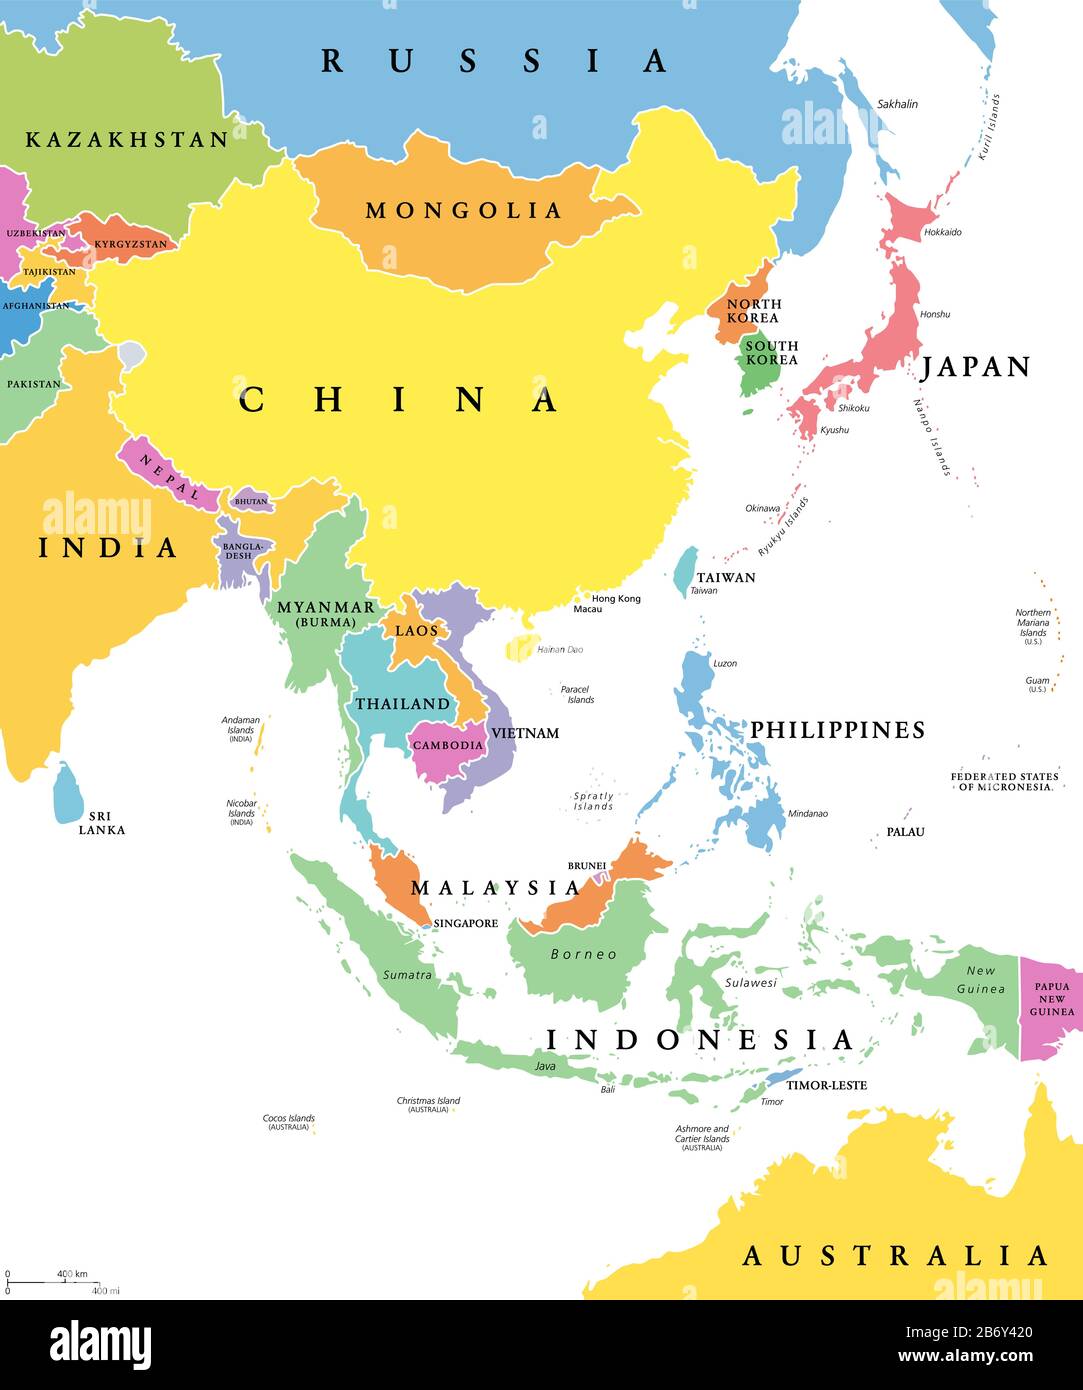 East Asia, single states, political map. All countries in different colors, with national borders, labeled with English country names. Stock Photo